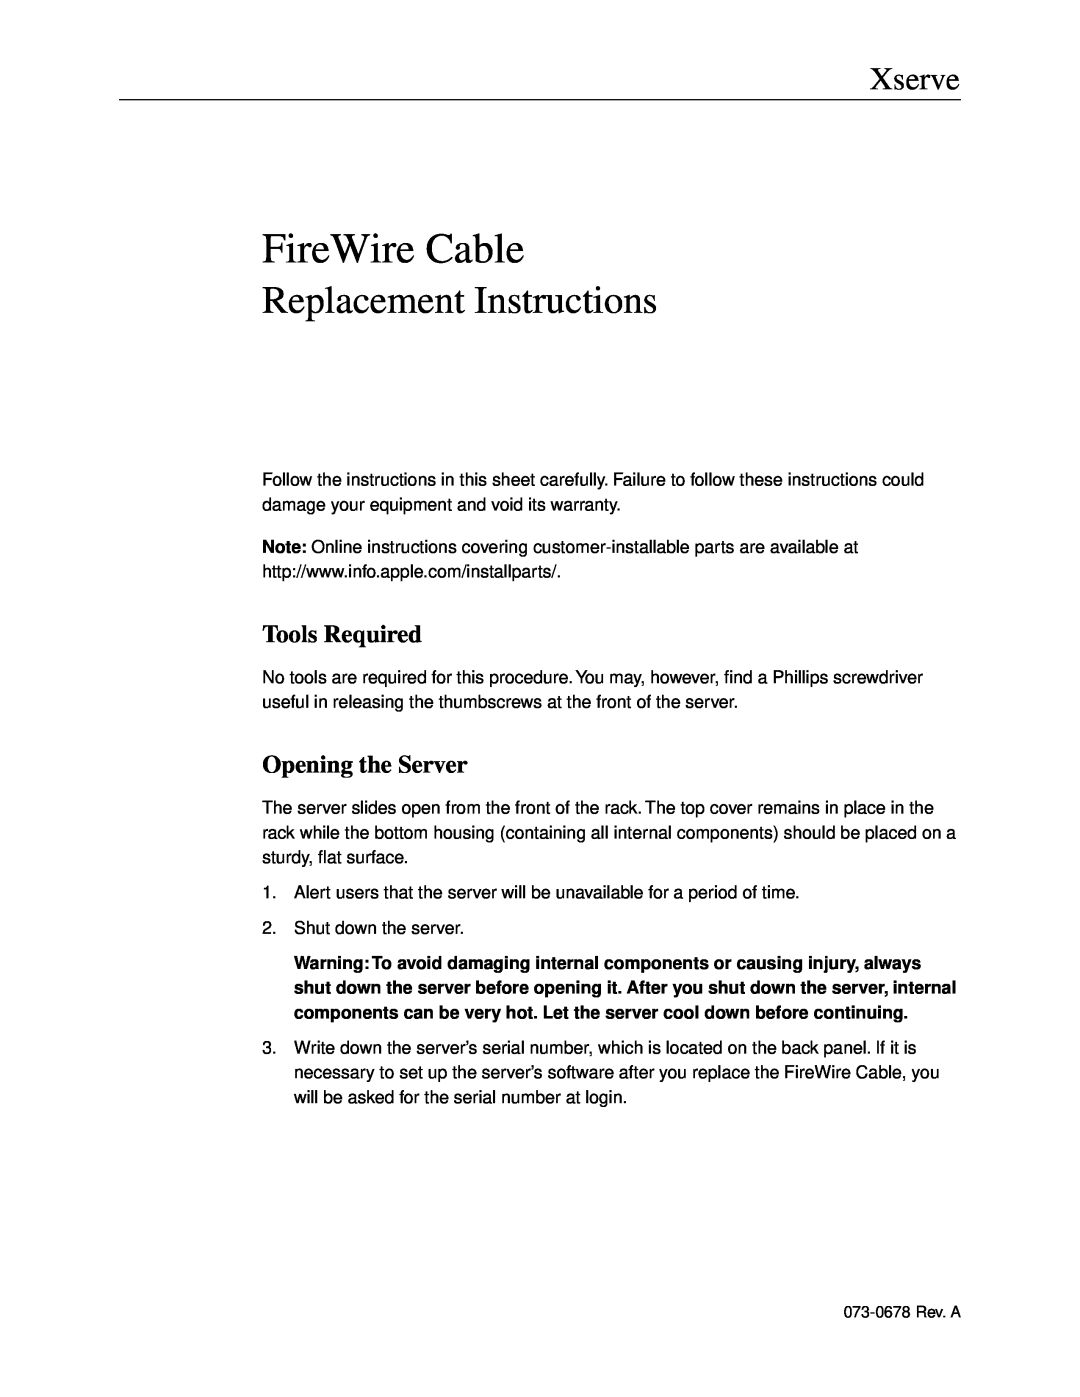 Apple FireWire Cable warranty Tools Required, Opening the Server, Replacement Instructions, Xserve 